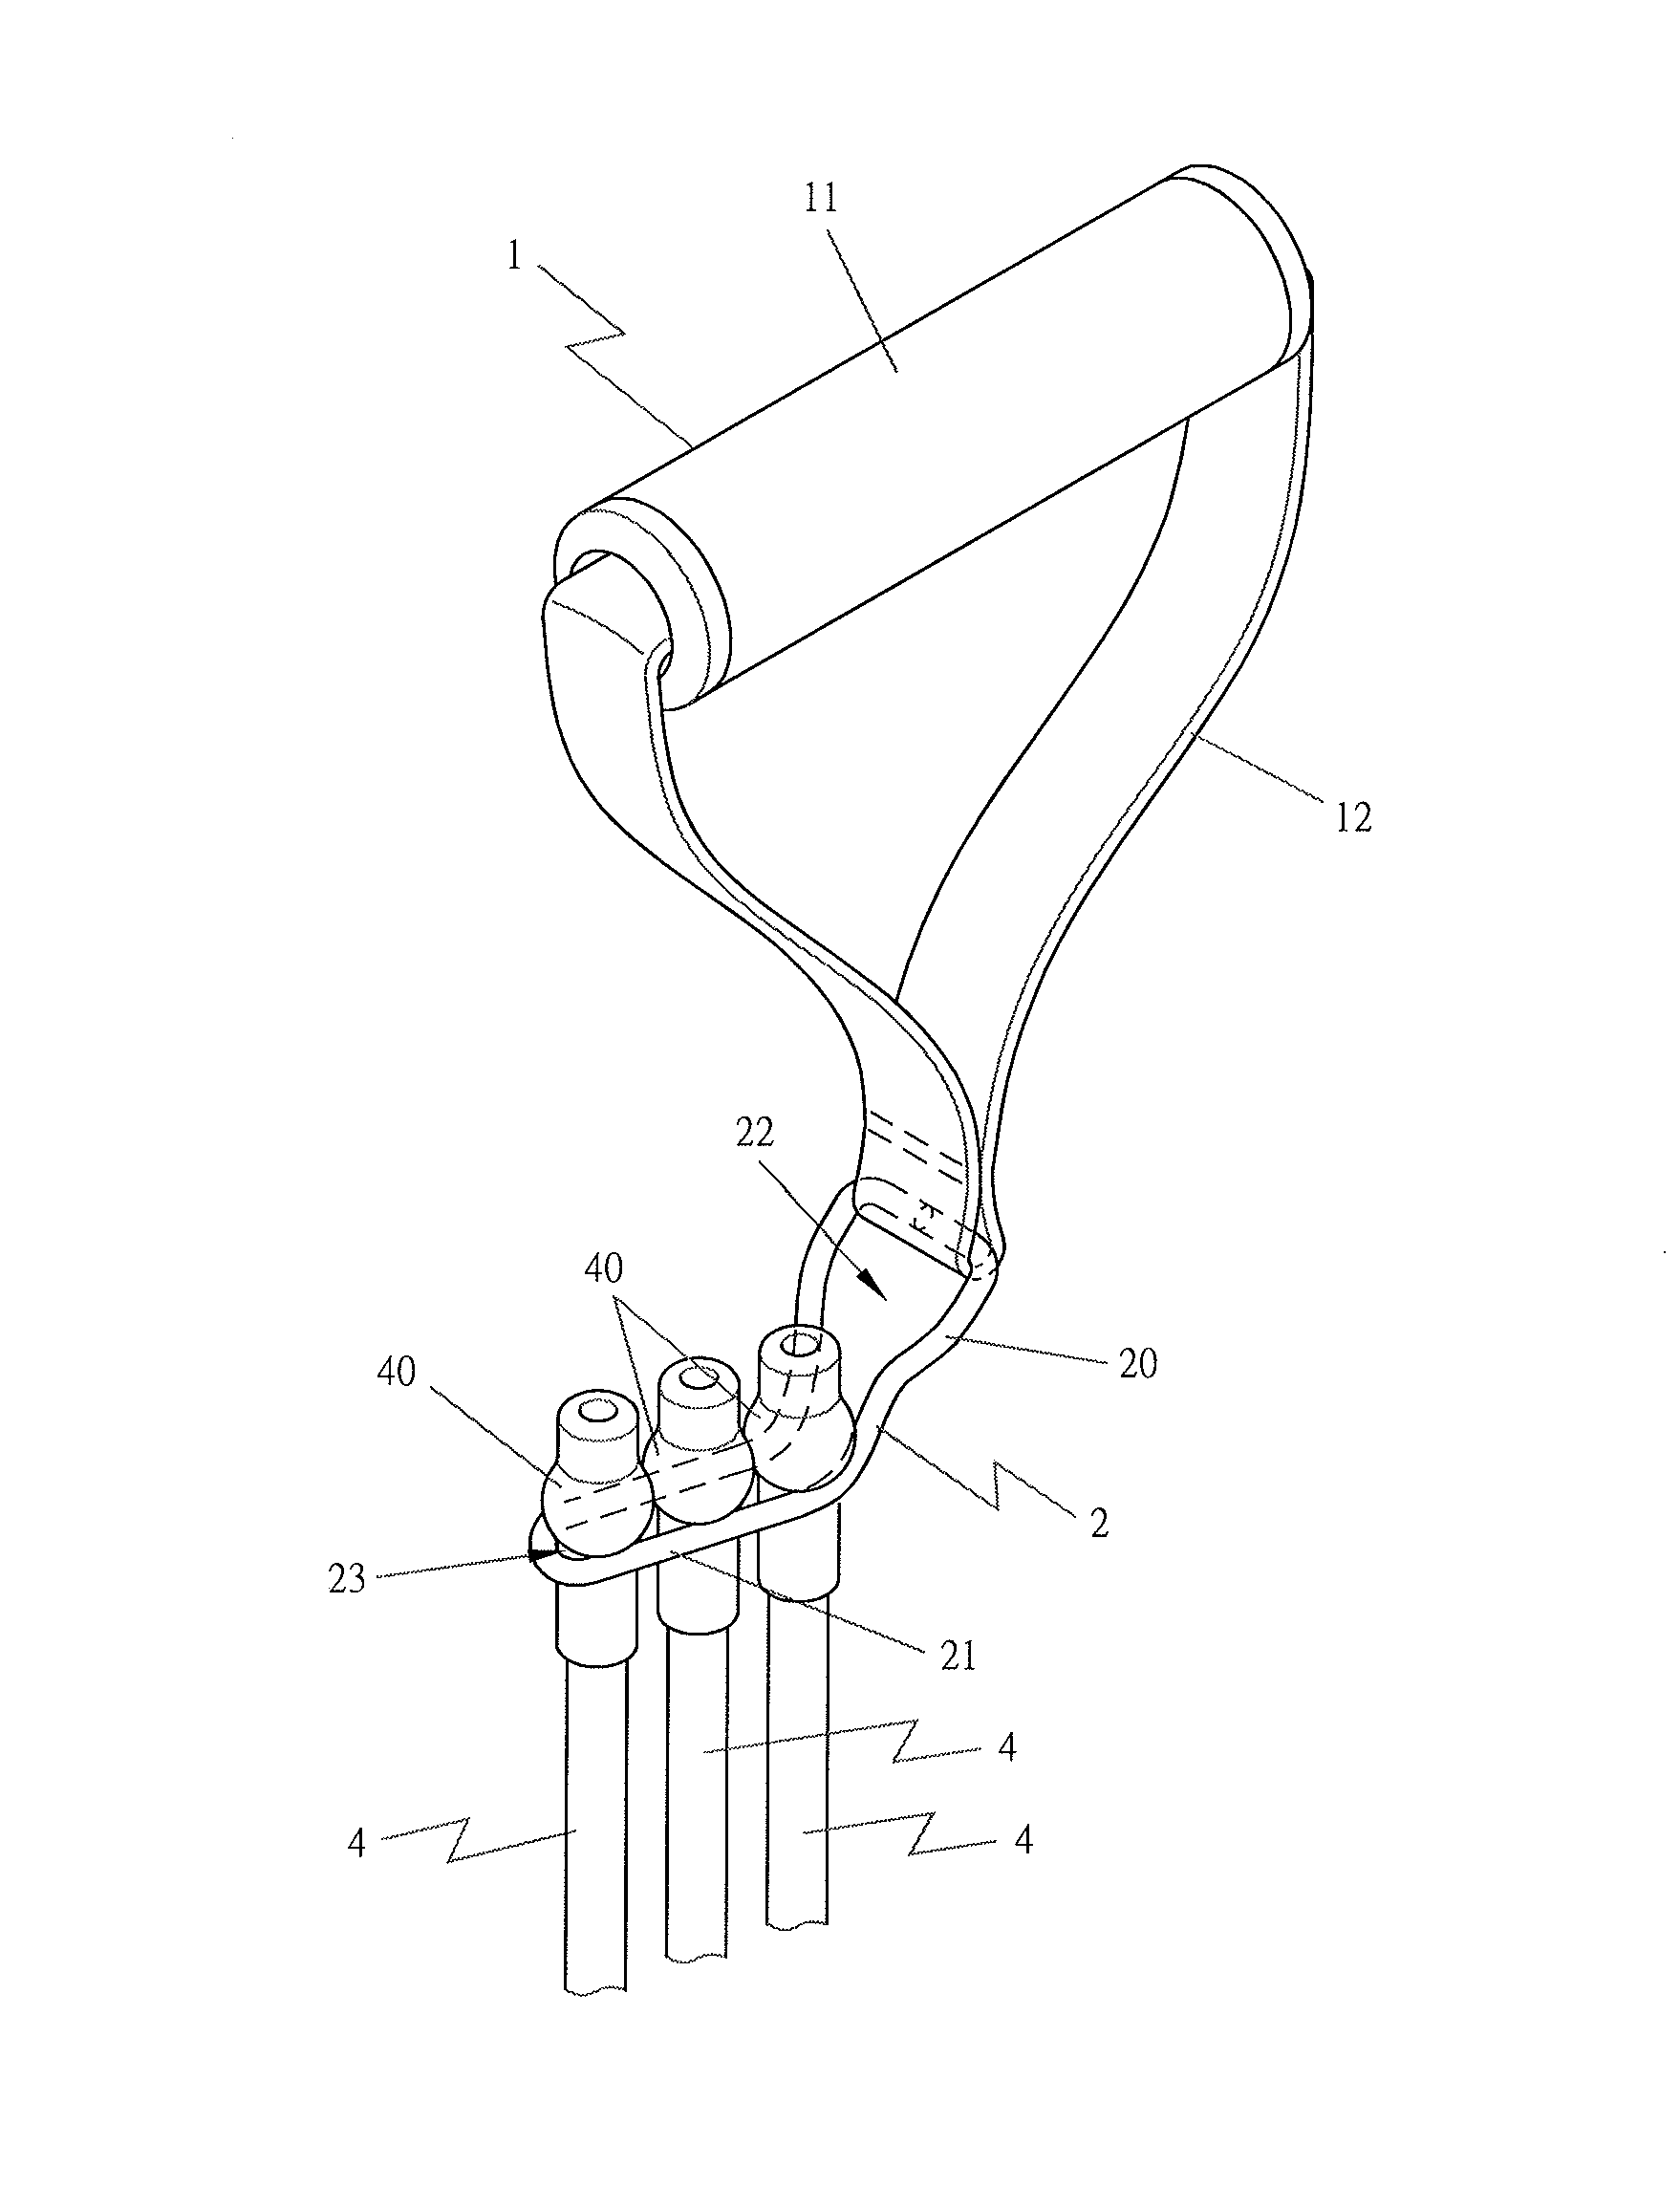 Apparatus for exercise, body building and rehabiliation